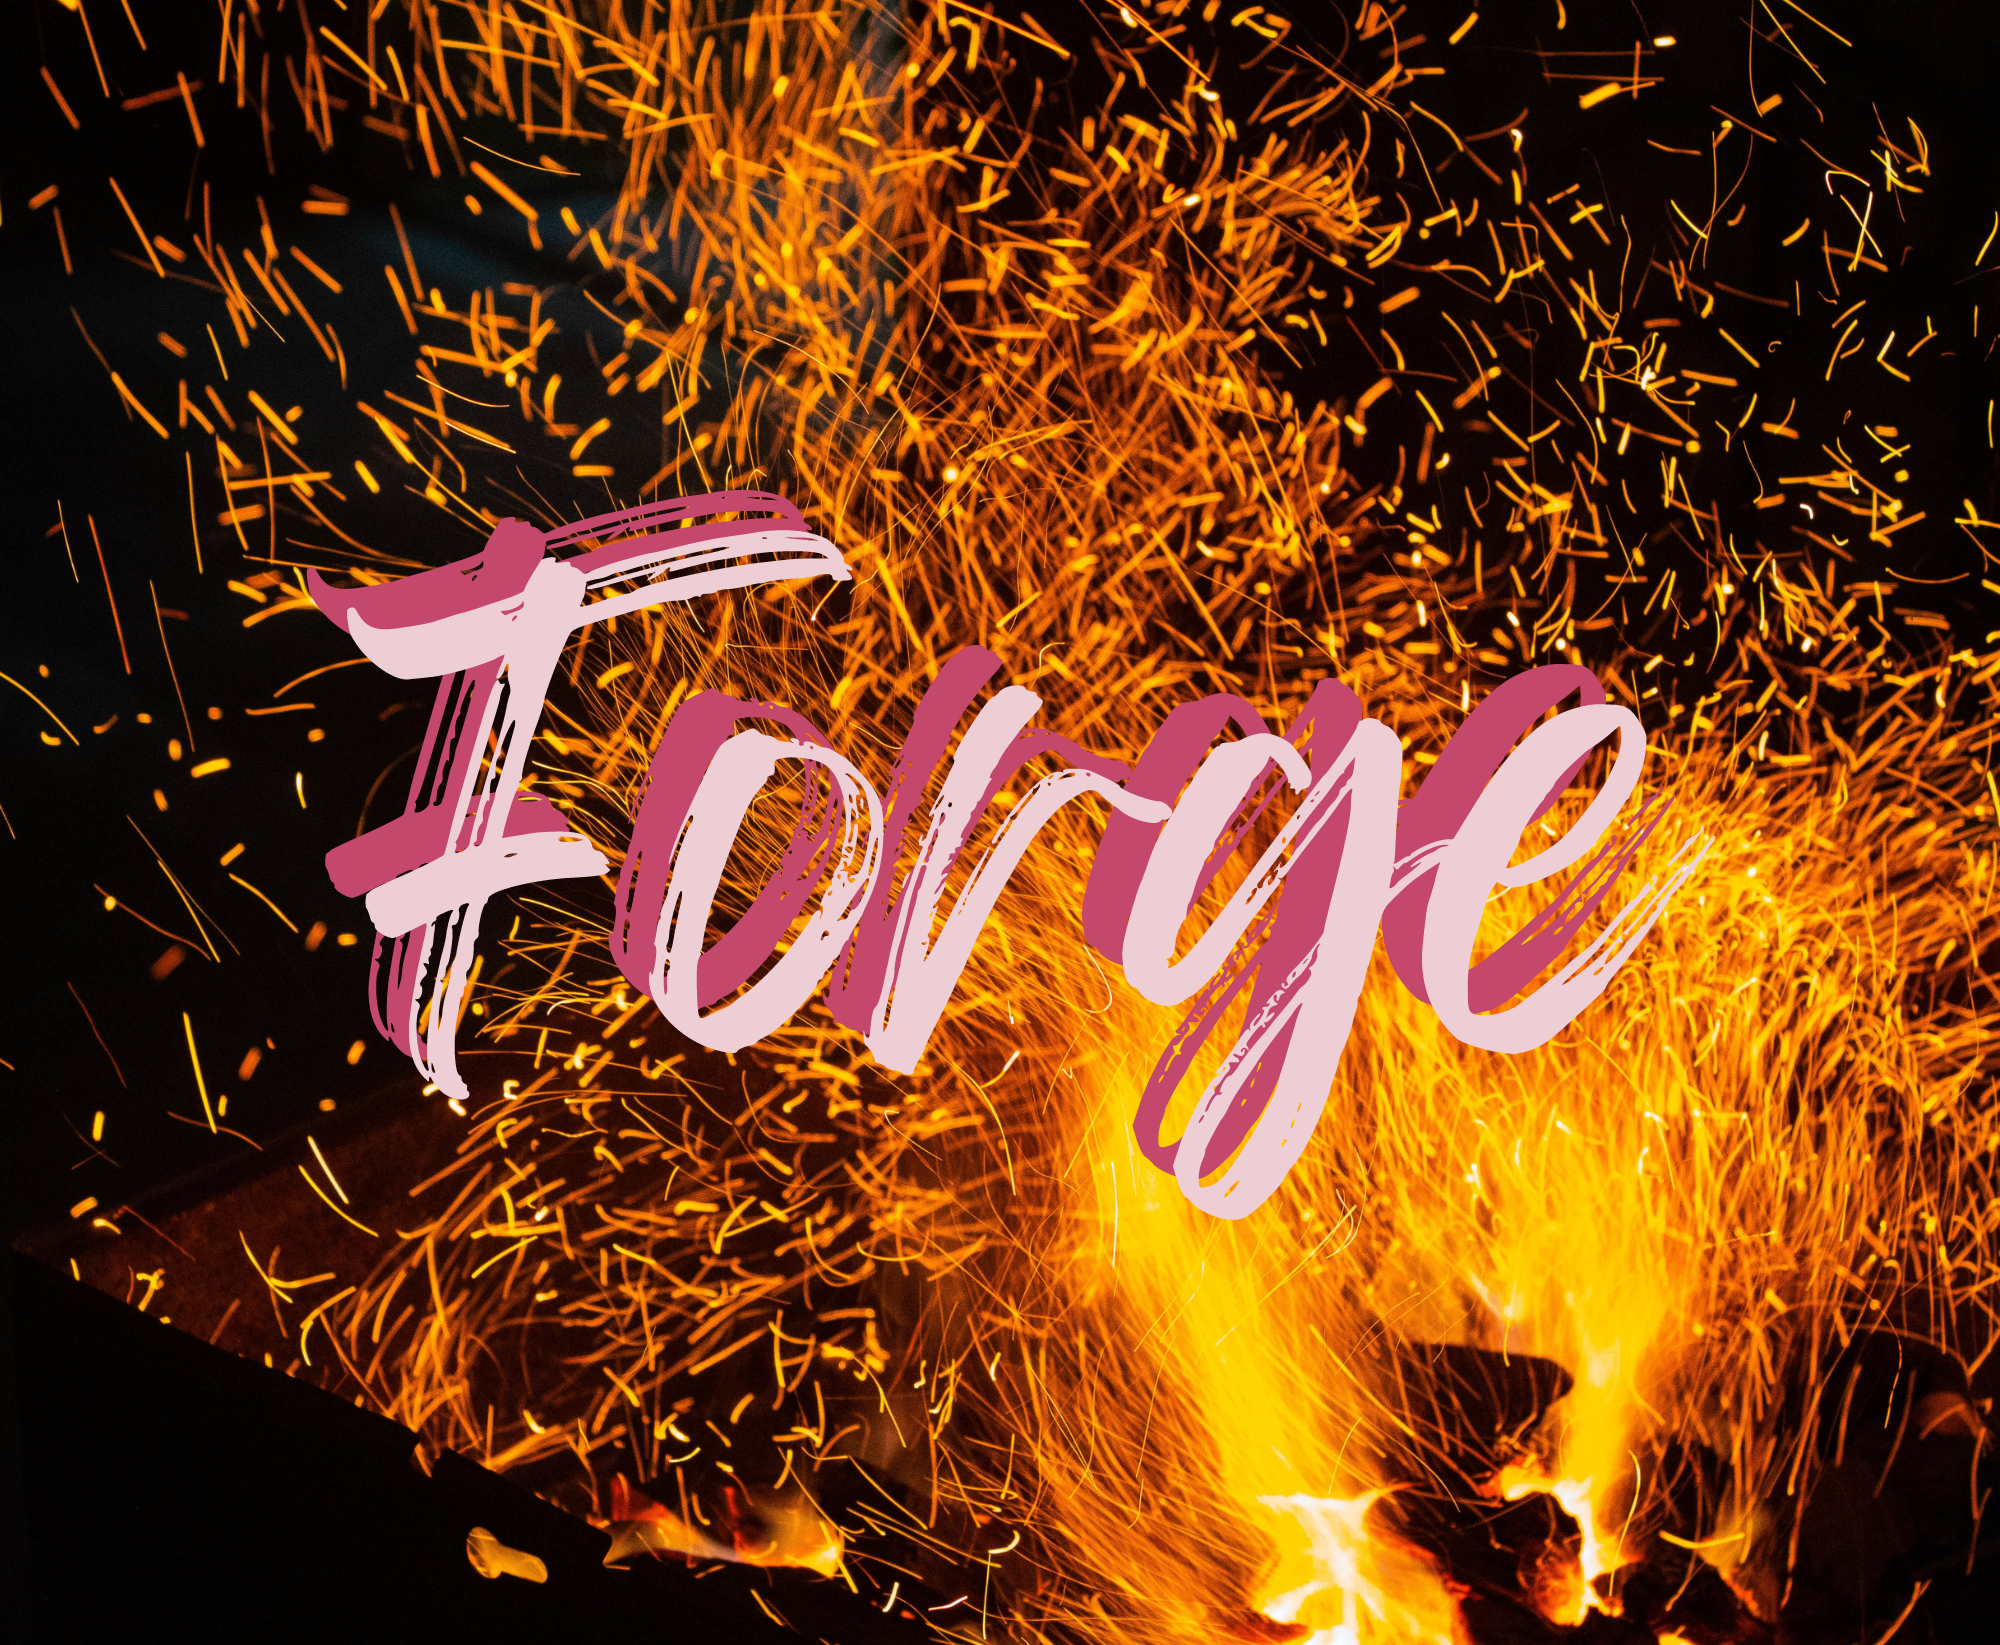 The word Forge appears over a fire